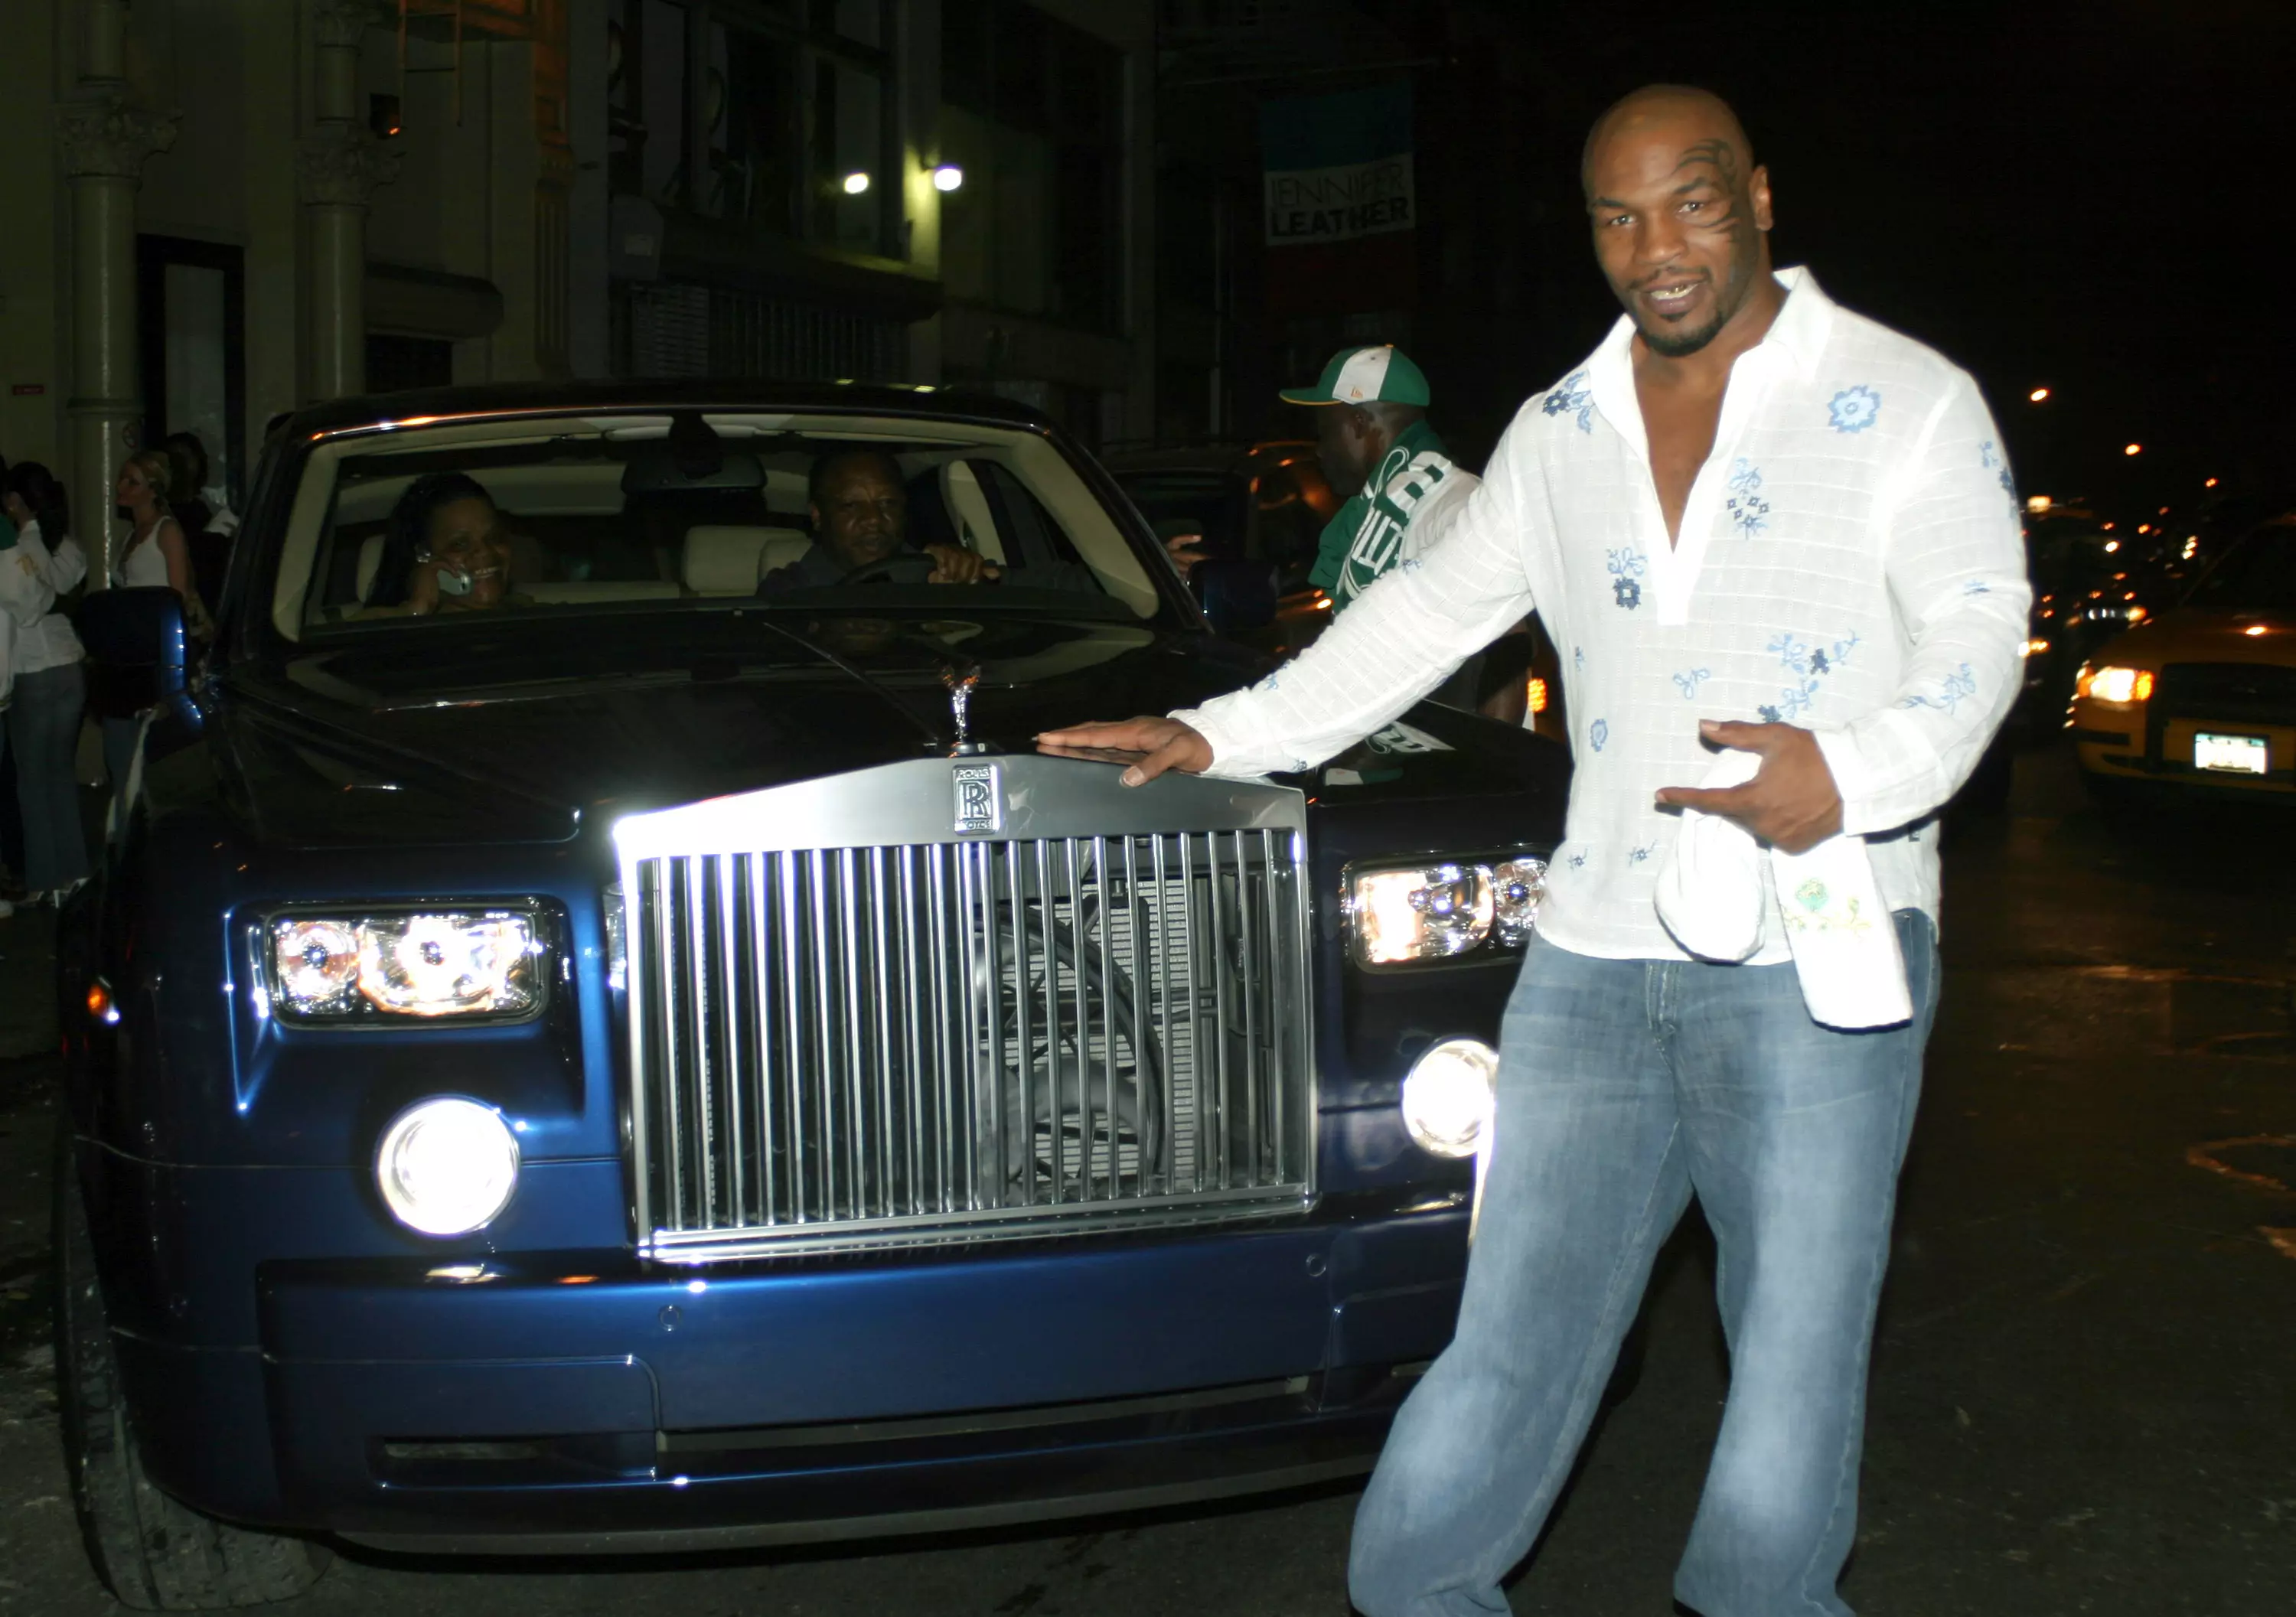 Mike Tyson poses with one of his Rolls-Royce cars.